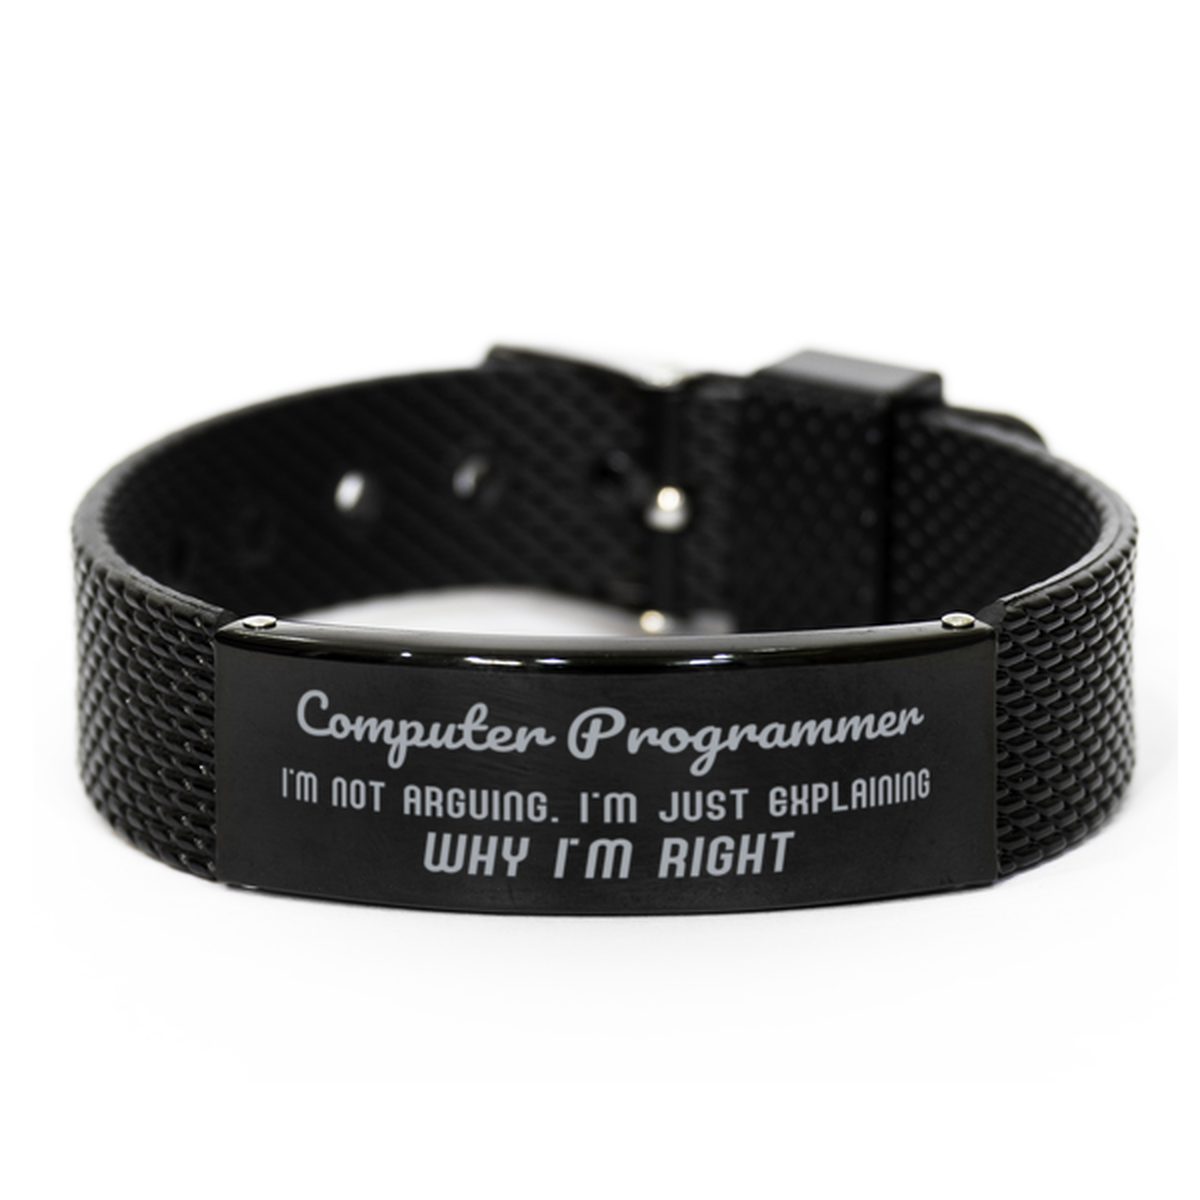 Computer Programmer I'm not Arguing. I'm Just Explaining Why I'm RIGHT Black Shark Mesh Bracelet, Funny Saying Quote Computer Programmer Gifts For Computer Programmer Graduation Birthday Christmas Gifts for Men Women Coworker